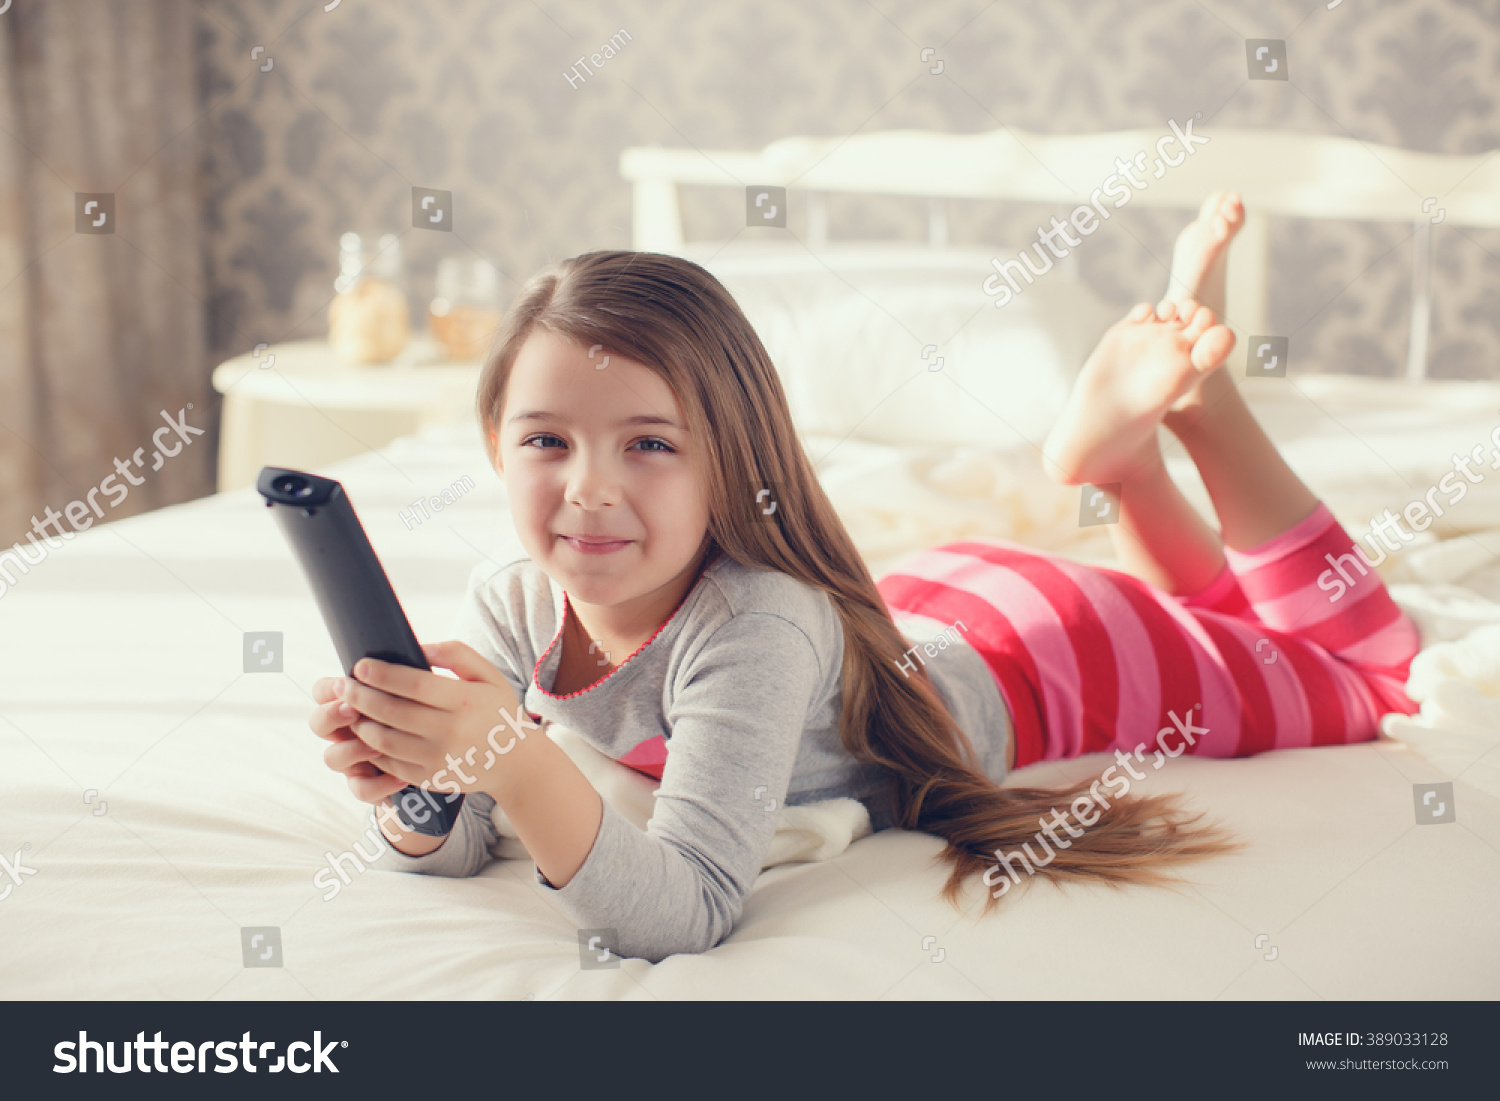 Little Girl Child Remote Control Watching  Stock Photo Edit Now 389033128 Shutterstock